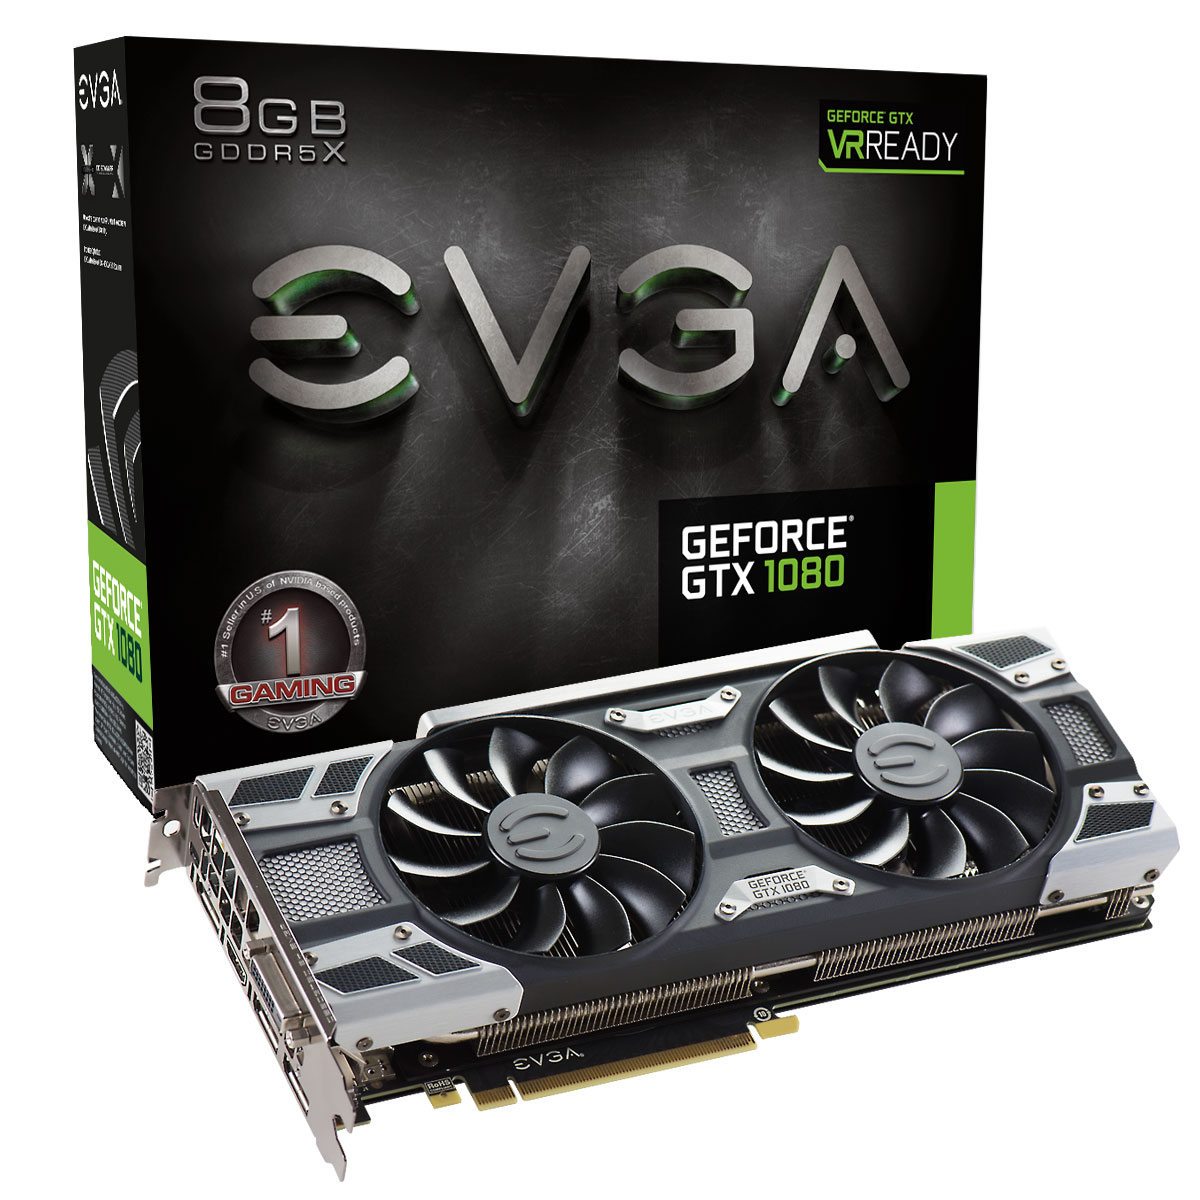 Media asset in full size related to 3dfxzone.it news item entitled as follows: EVGA annuncia cinque video card GeForce GTX 1080, reference e non | Image Name: news24333_EVGA-GeForce-GTX-1080-ACX-3_1.jpg